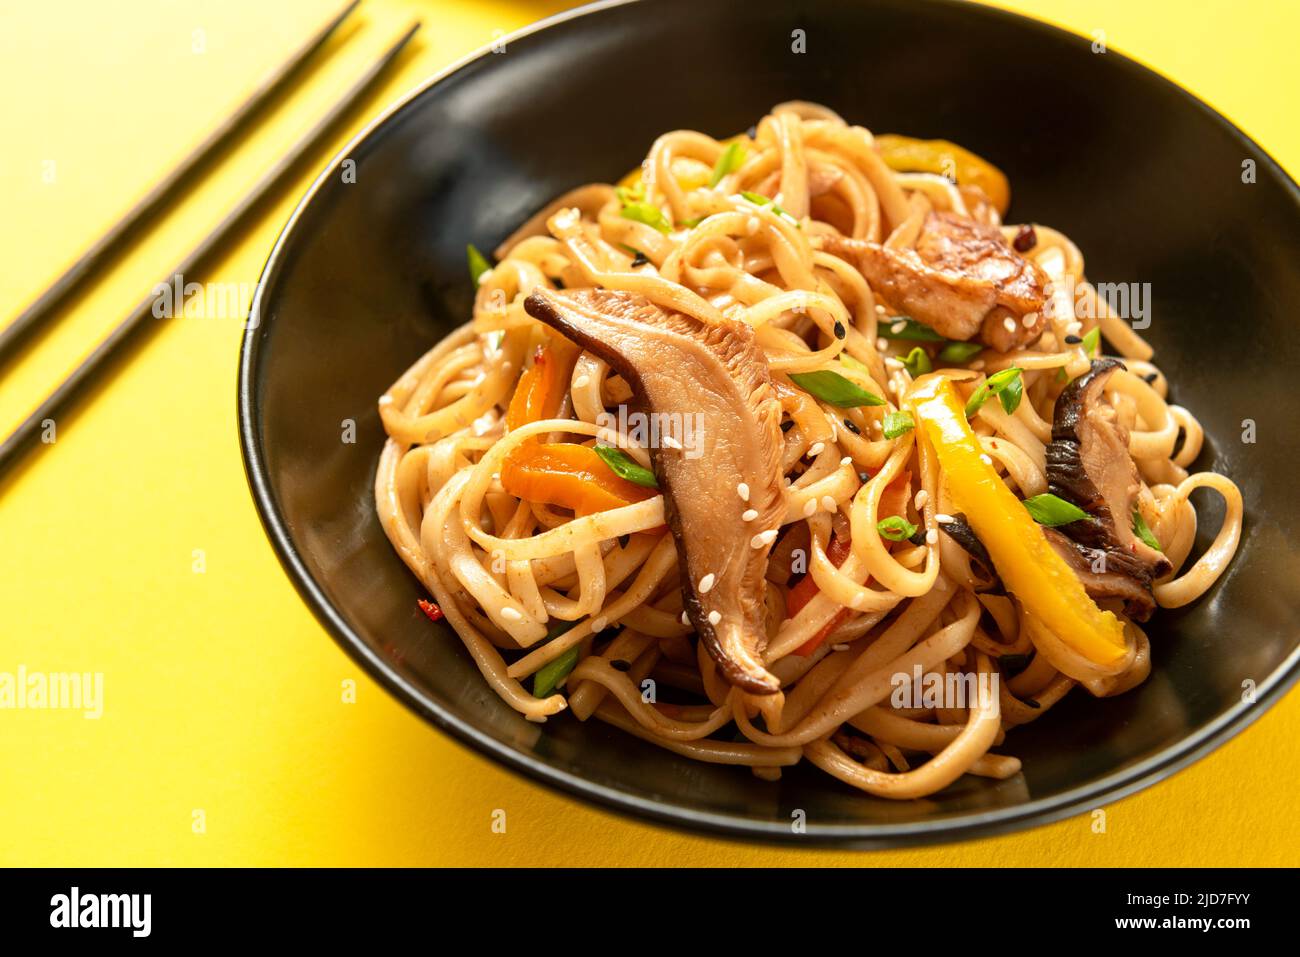 a traditional Asian dish. Chinese udon noodles in a black plate on a yellow background Stock Photo